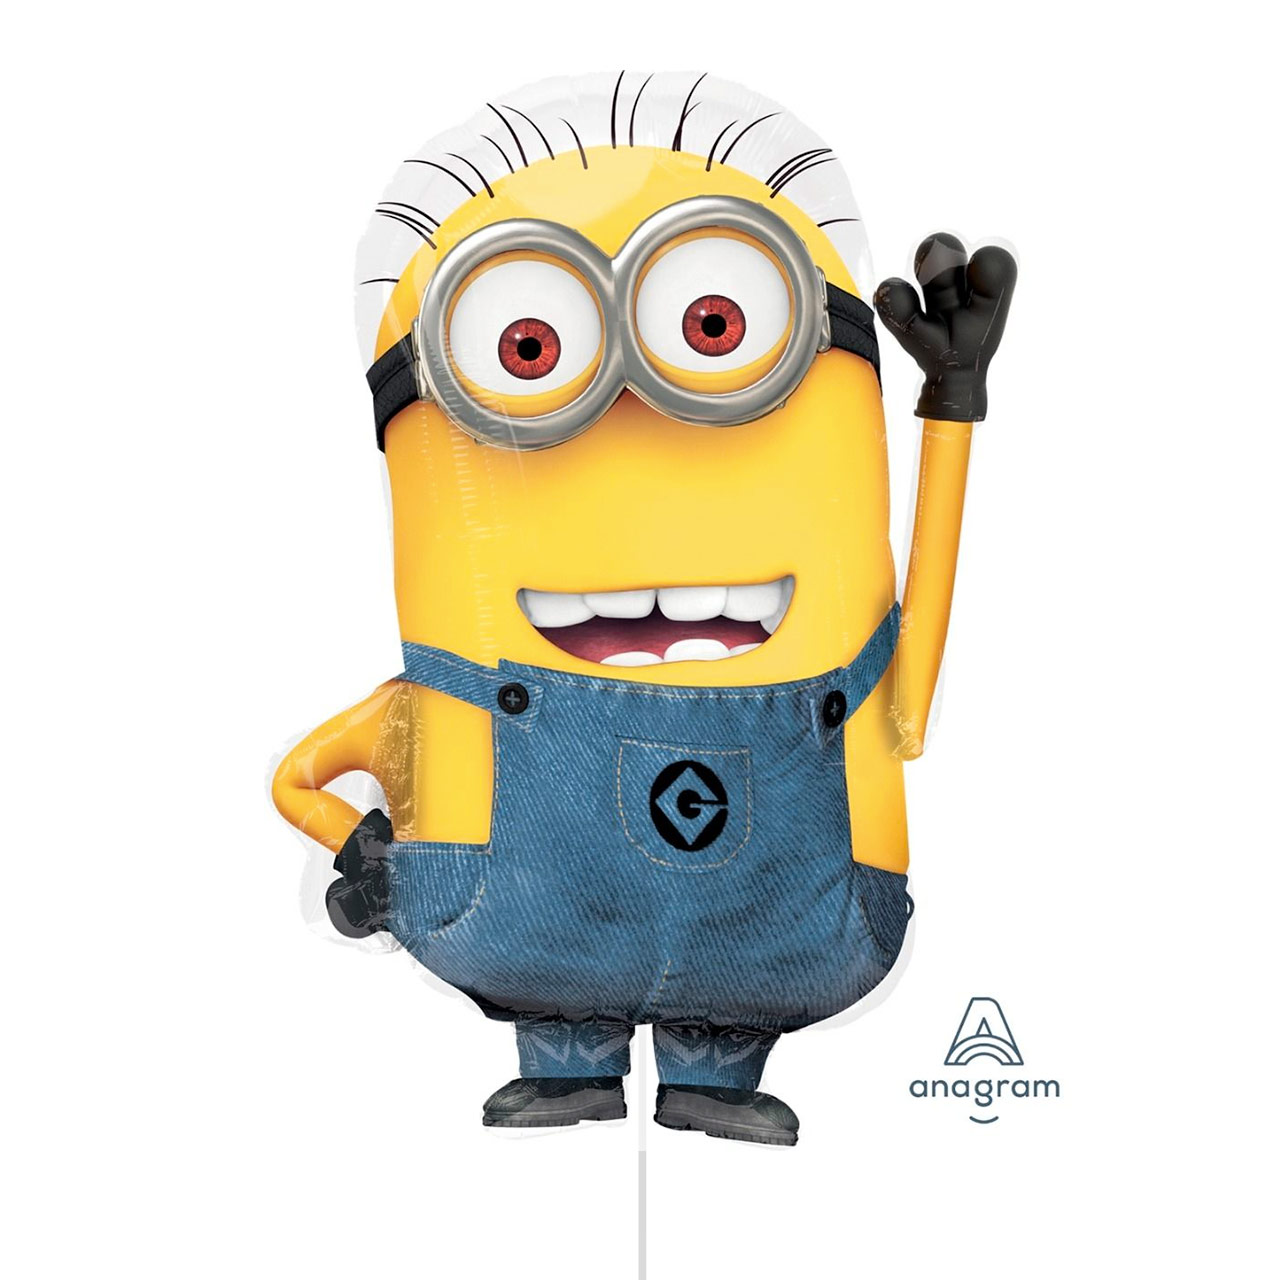 '[Character] Minion Licensed Shape Anagram Foil Balloon